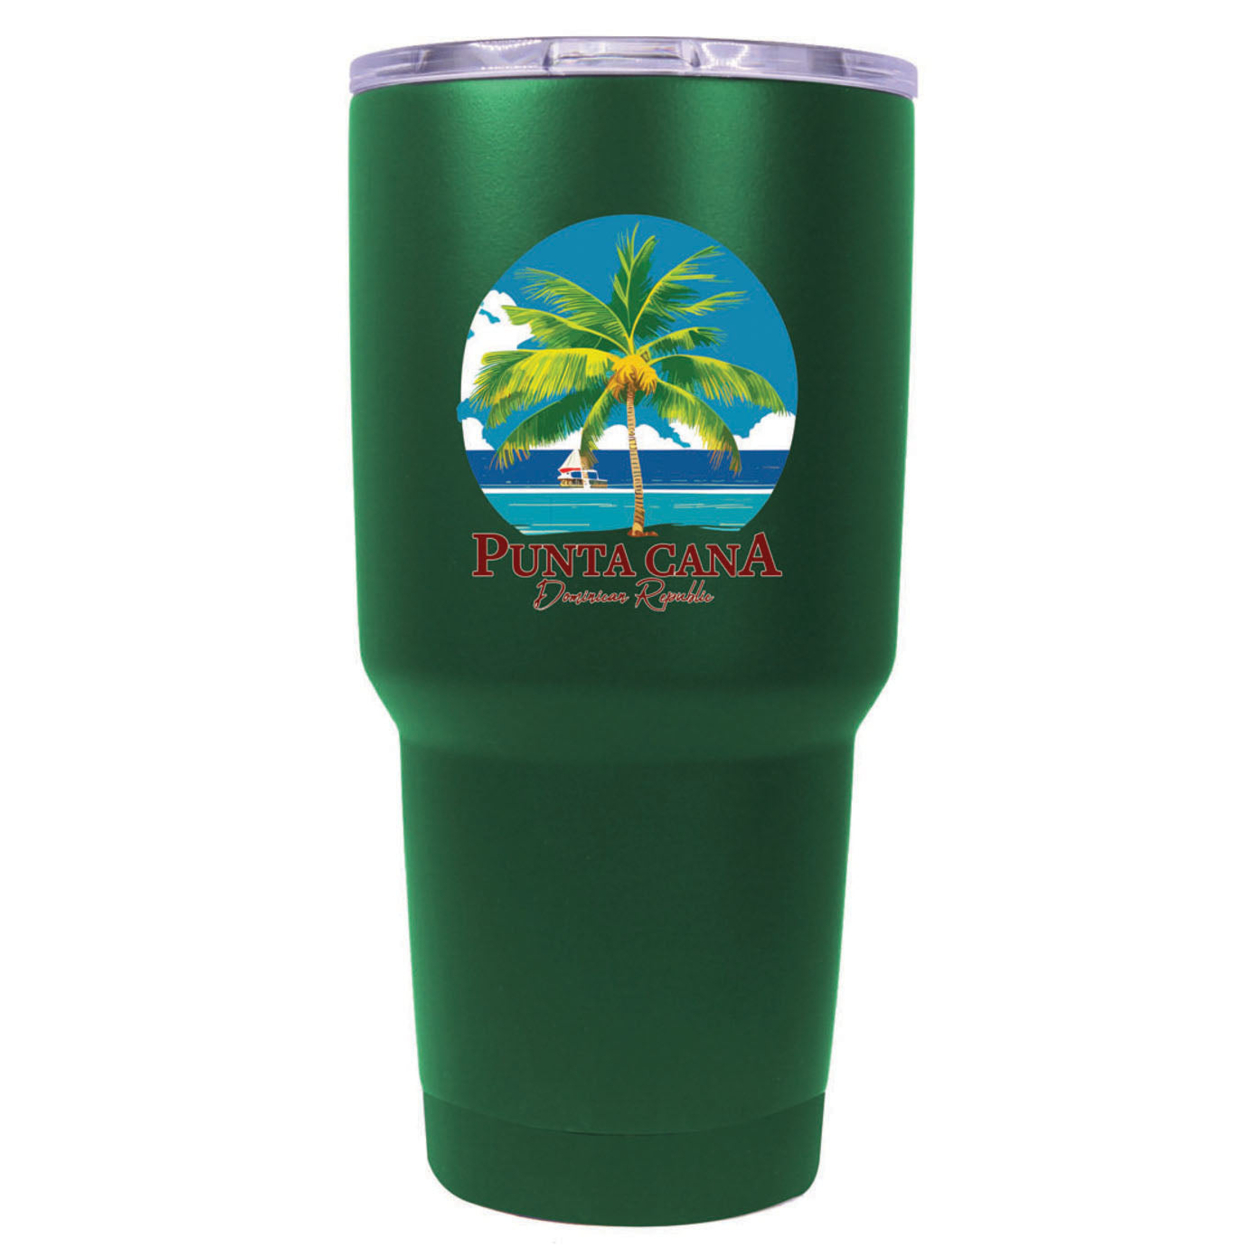 Punta Cana Dominican Republic Souvenir 24 Oz Insulated Stainless Steel Tumbler - Coral, PARROT